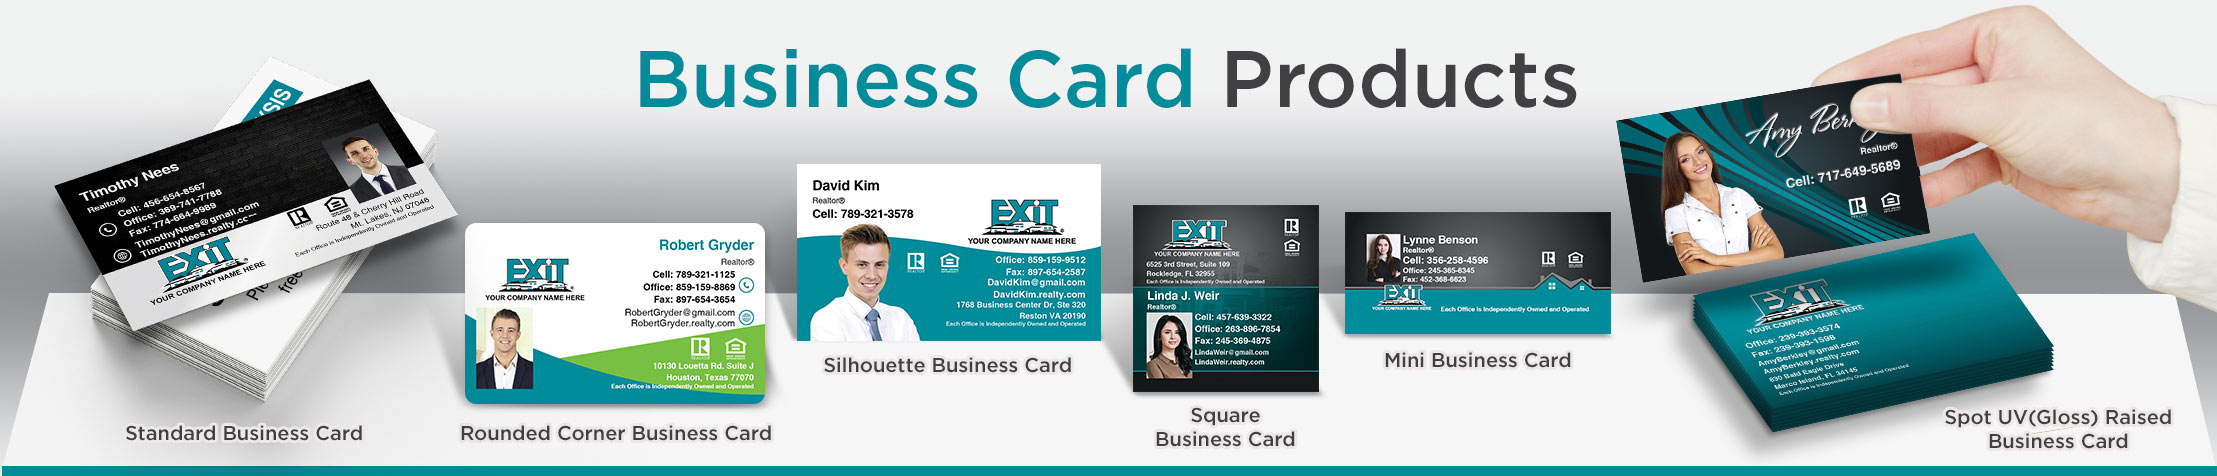 Exit Realty Real Estate Business Card Products - Exit Realty Approved Vendor - Unique, Custom Business Cards Printed on Quality Stock with Creative Designs for Realtors | BestPrintBuy.com